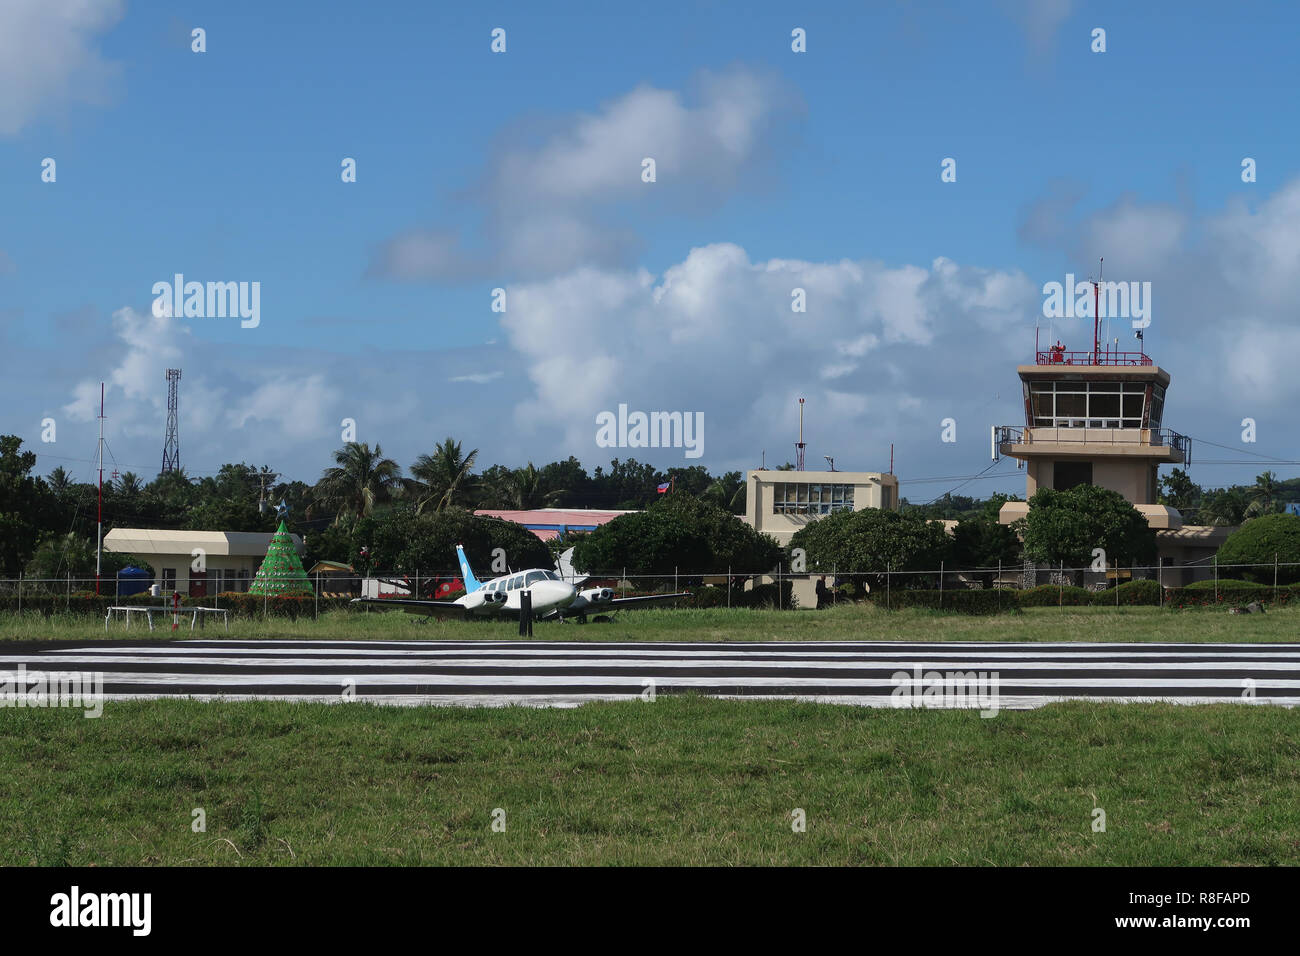 The small Basco airport in Batan the main island of Batanes the northernmost archipelago province of the Philippines situated in the Cagayan Valley region Stock Photo